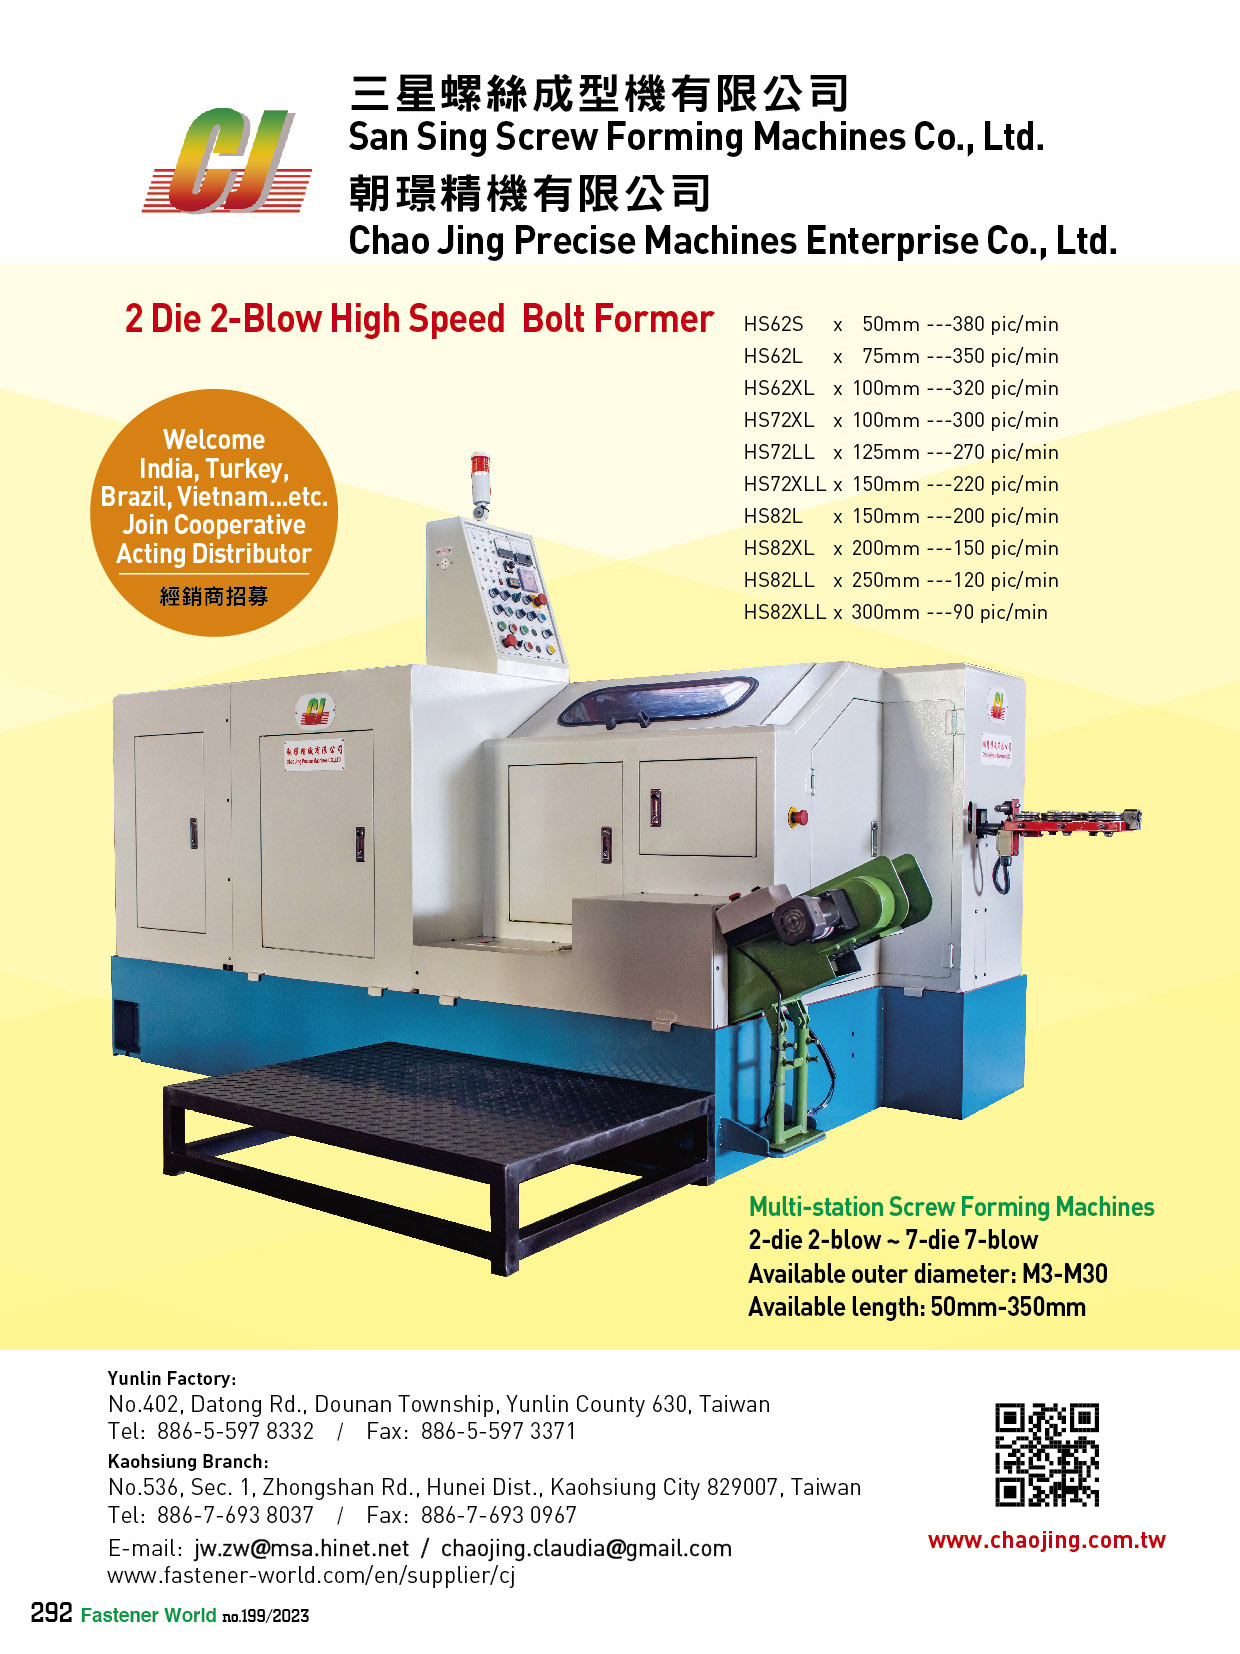 Chao Jing Precise Machines Enterprise Co., Ltd. (San Sing Screw Forming Machines) , 2 Die 2-Blow High Speed Bolt Former, Cold Forge Forming Machine